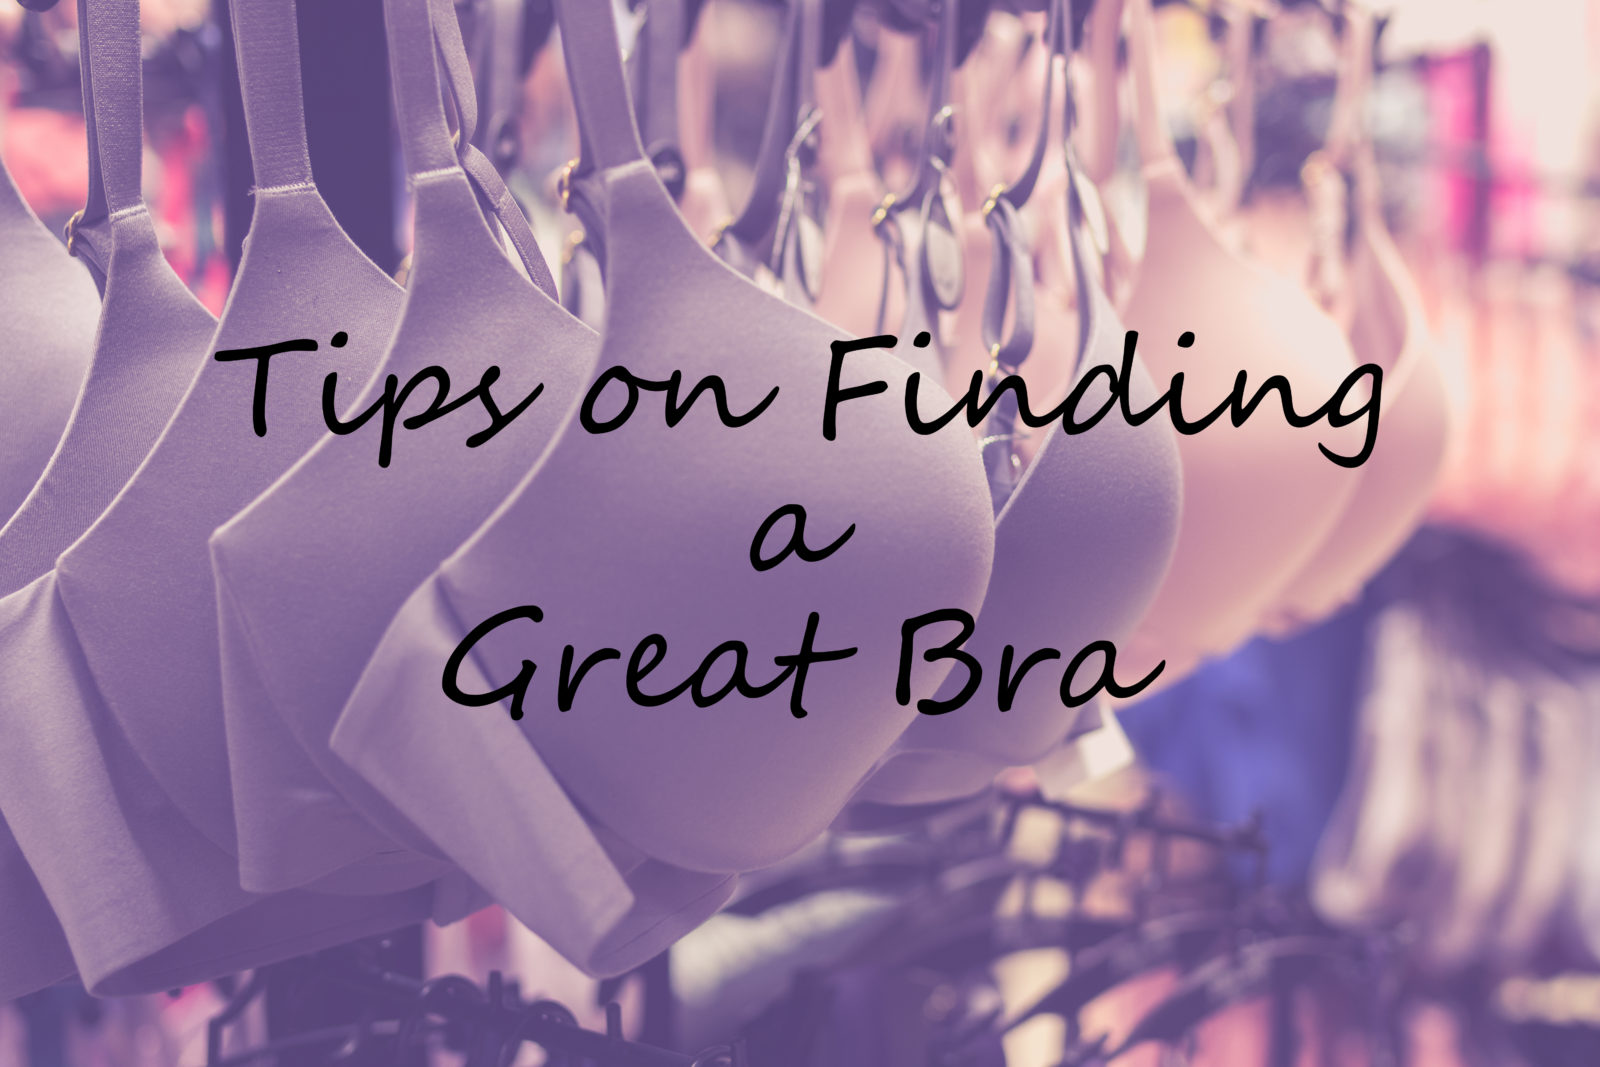 Tips on Finding a Great Bra